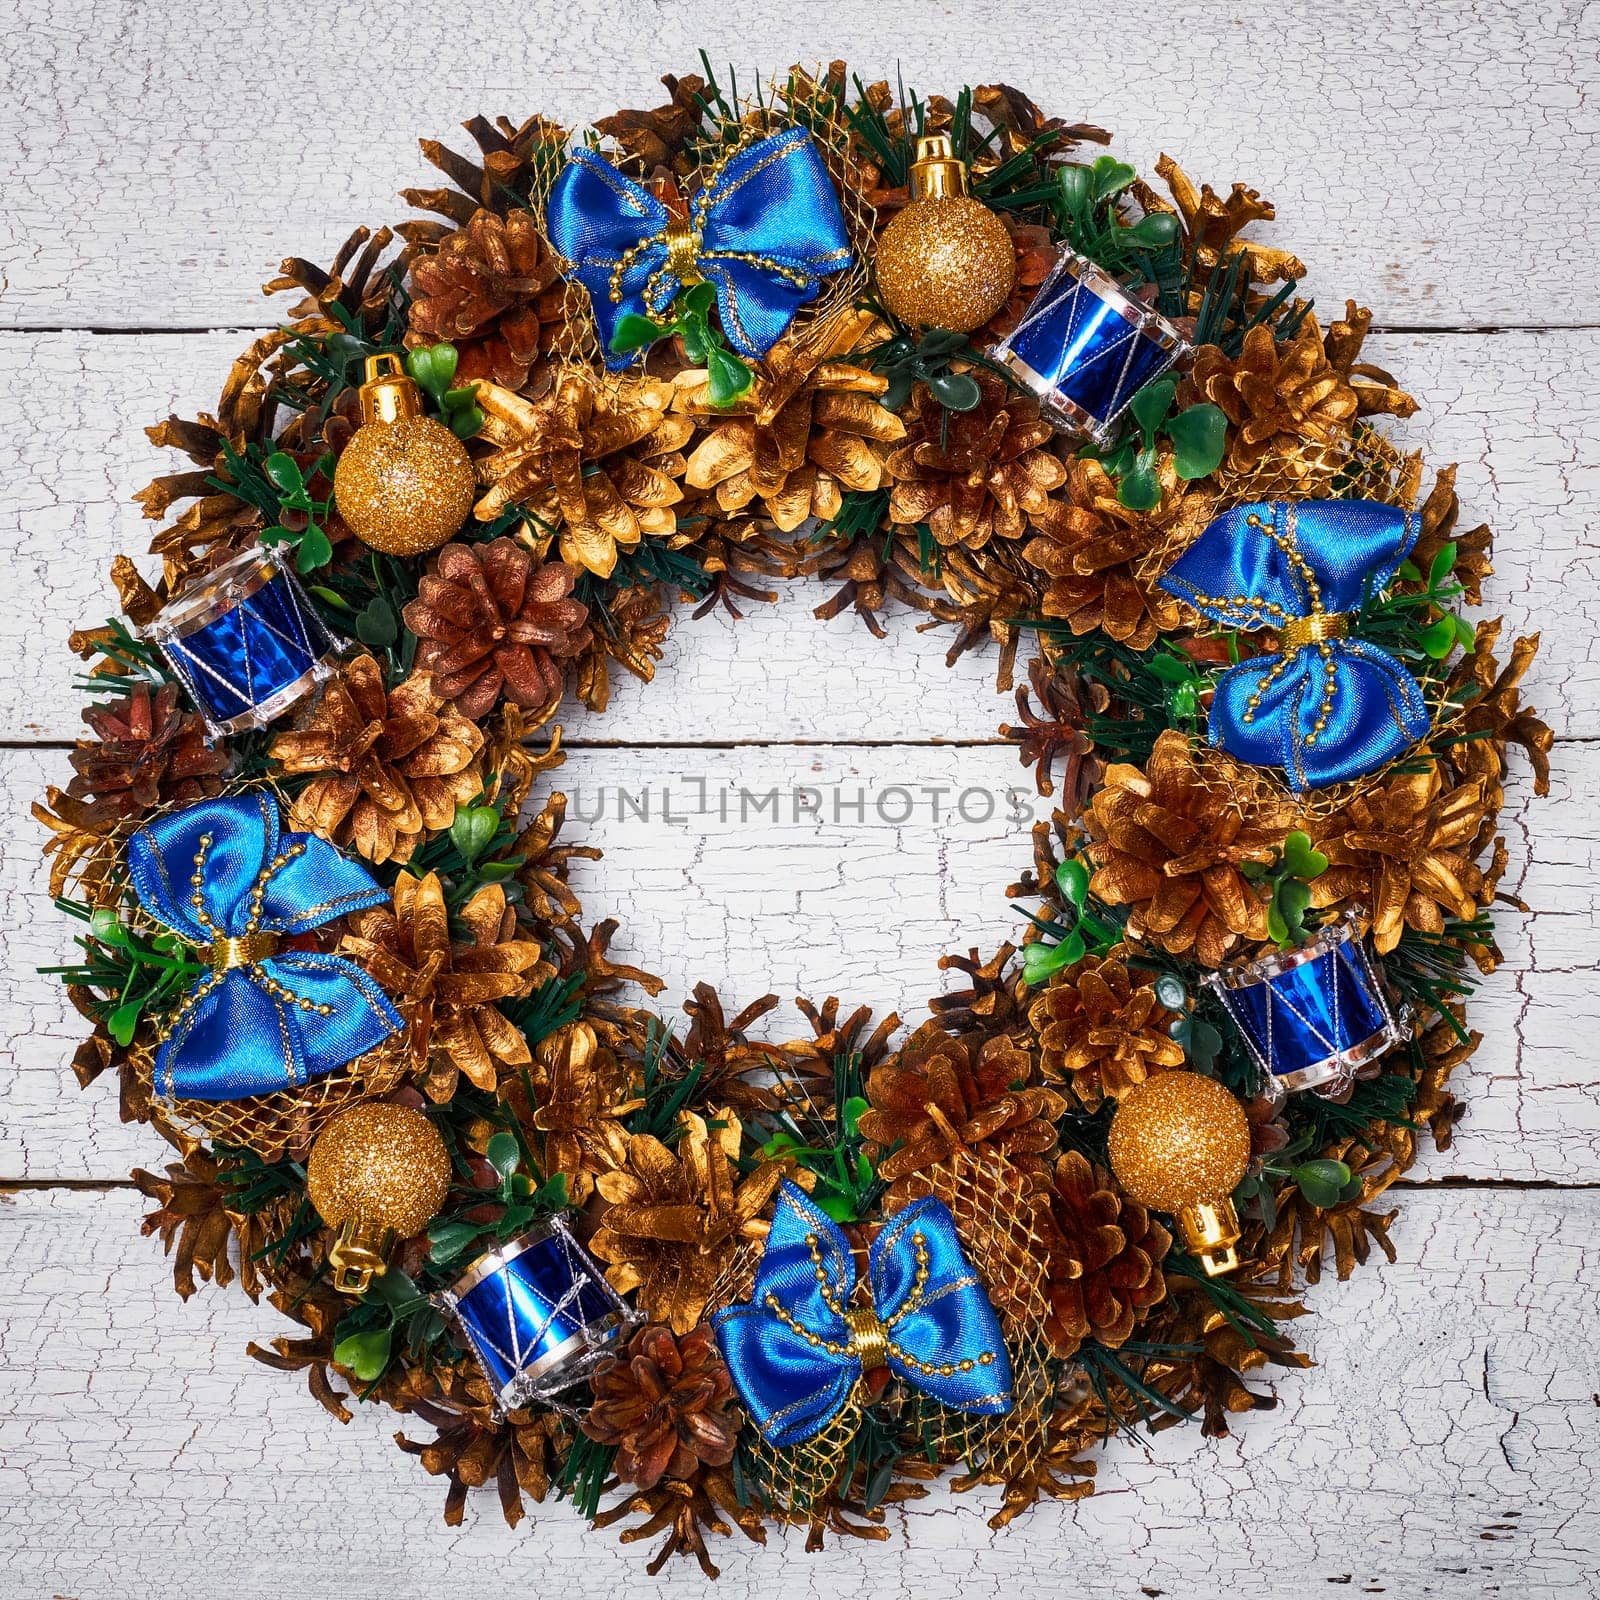 Christmas wreath top view by dimol